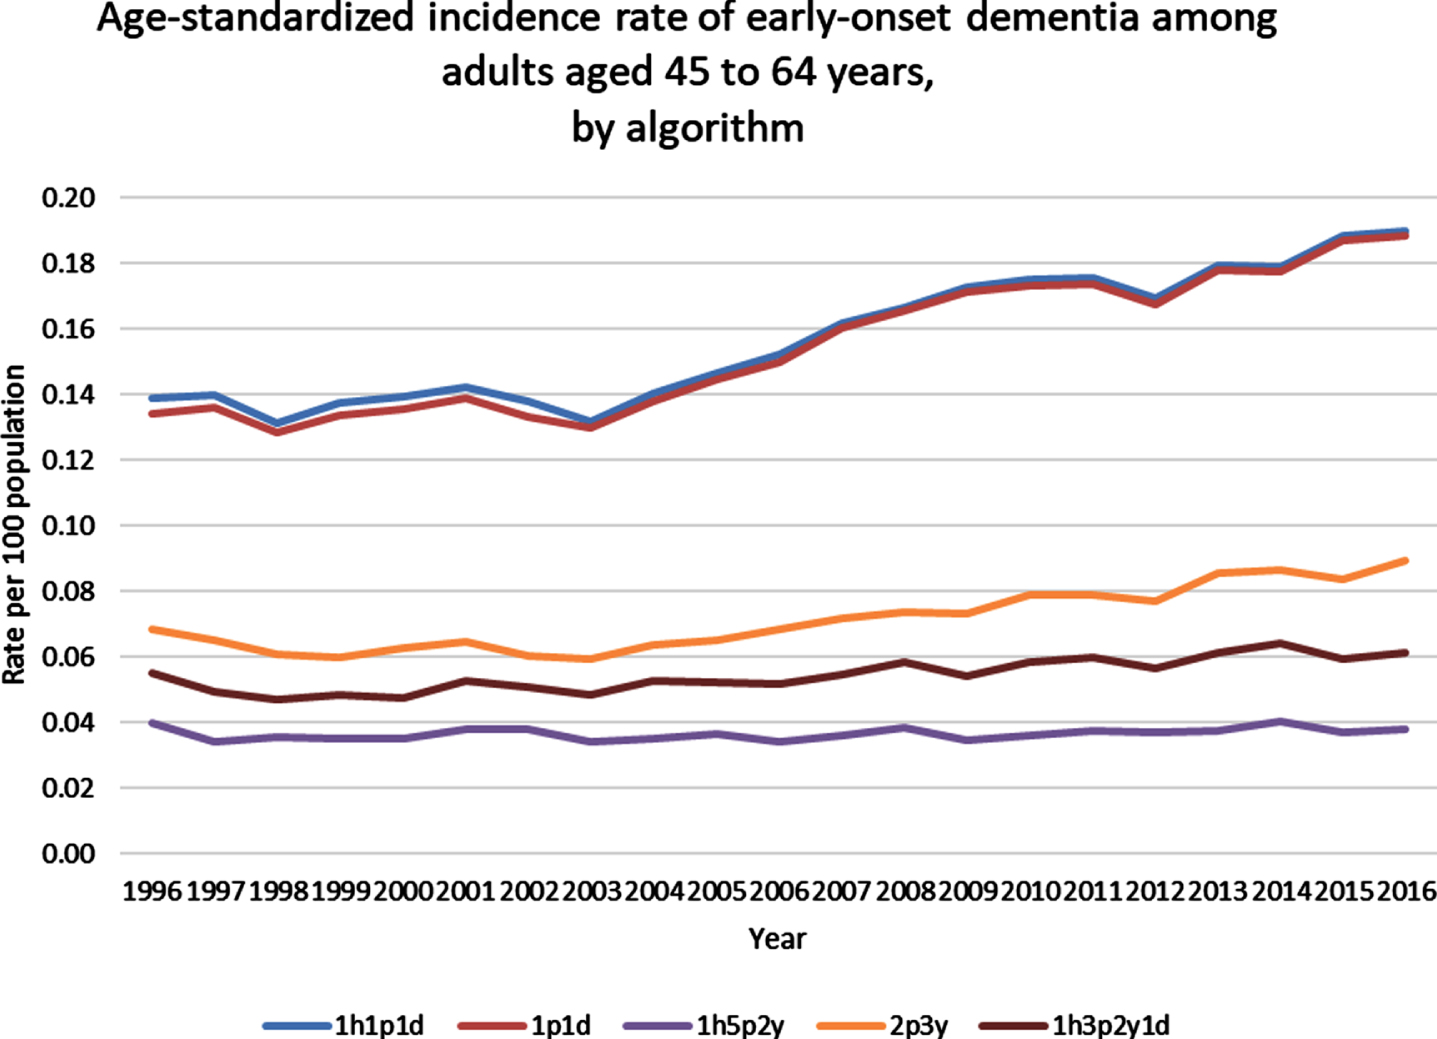 Age-standardized incidence rate of early-onset dementia among adults aged 45 to 64 years, by algorithm. h, hospitalization claim; p, physician claim; d, drug benefit claim; y, year.